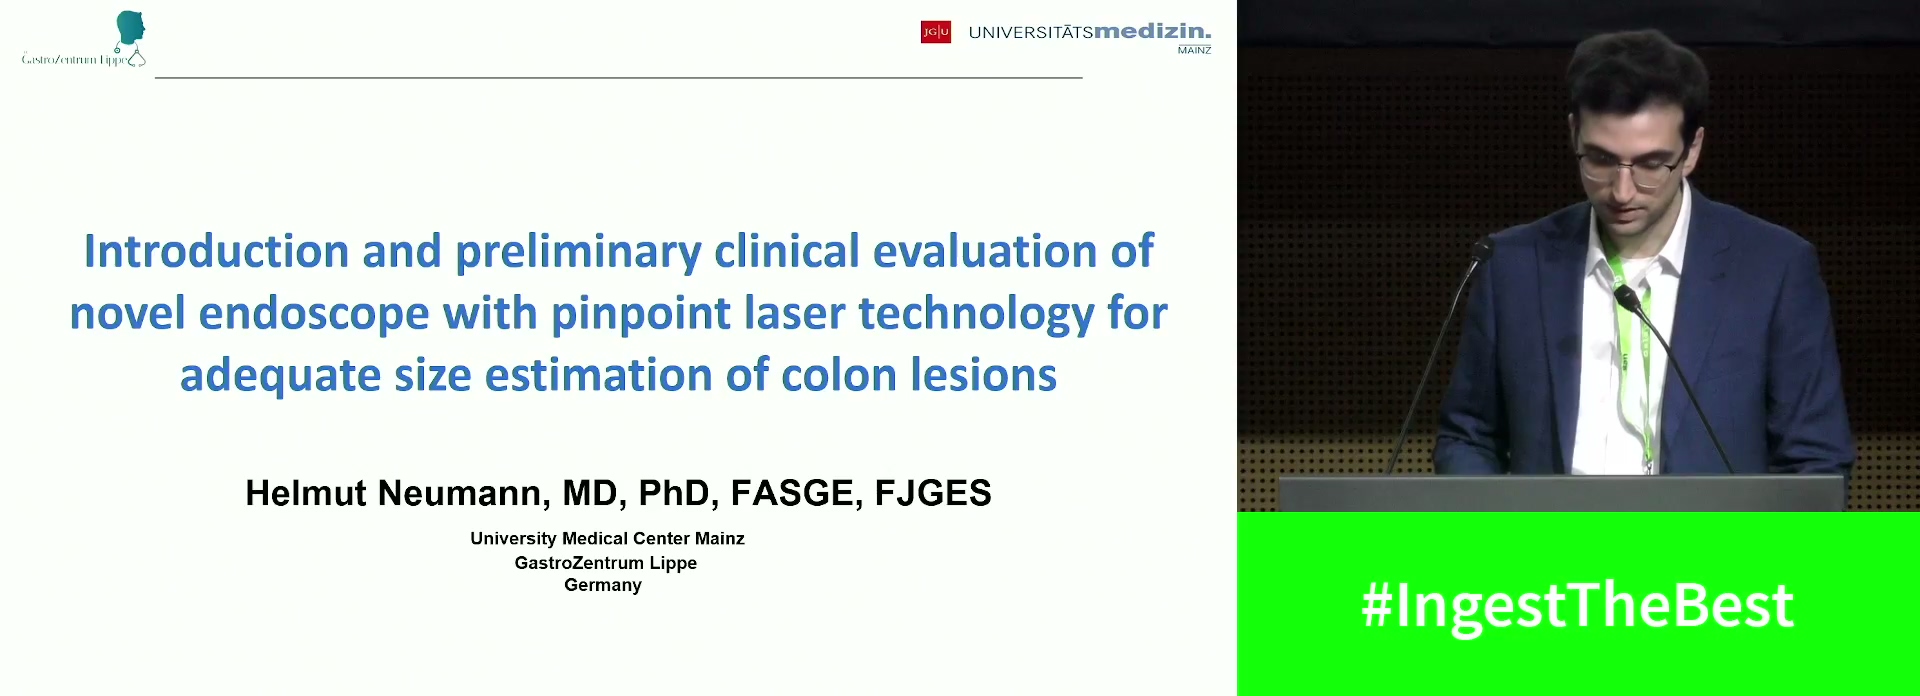 INTRODUCTION AND PRELIMINARY CLINICAL EVALUATION OF NOVEL ENDOSCOPE WITH PINPOINT LASER TECHNOLOGY FOR ADEQUATE SIZE ESTIMATION OF COLON LESIONS